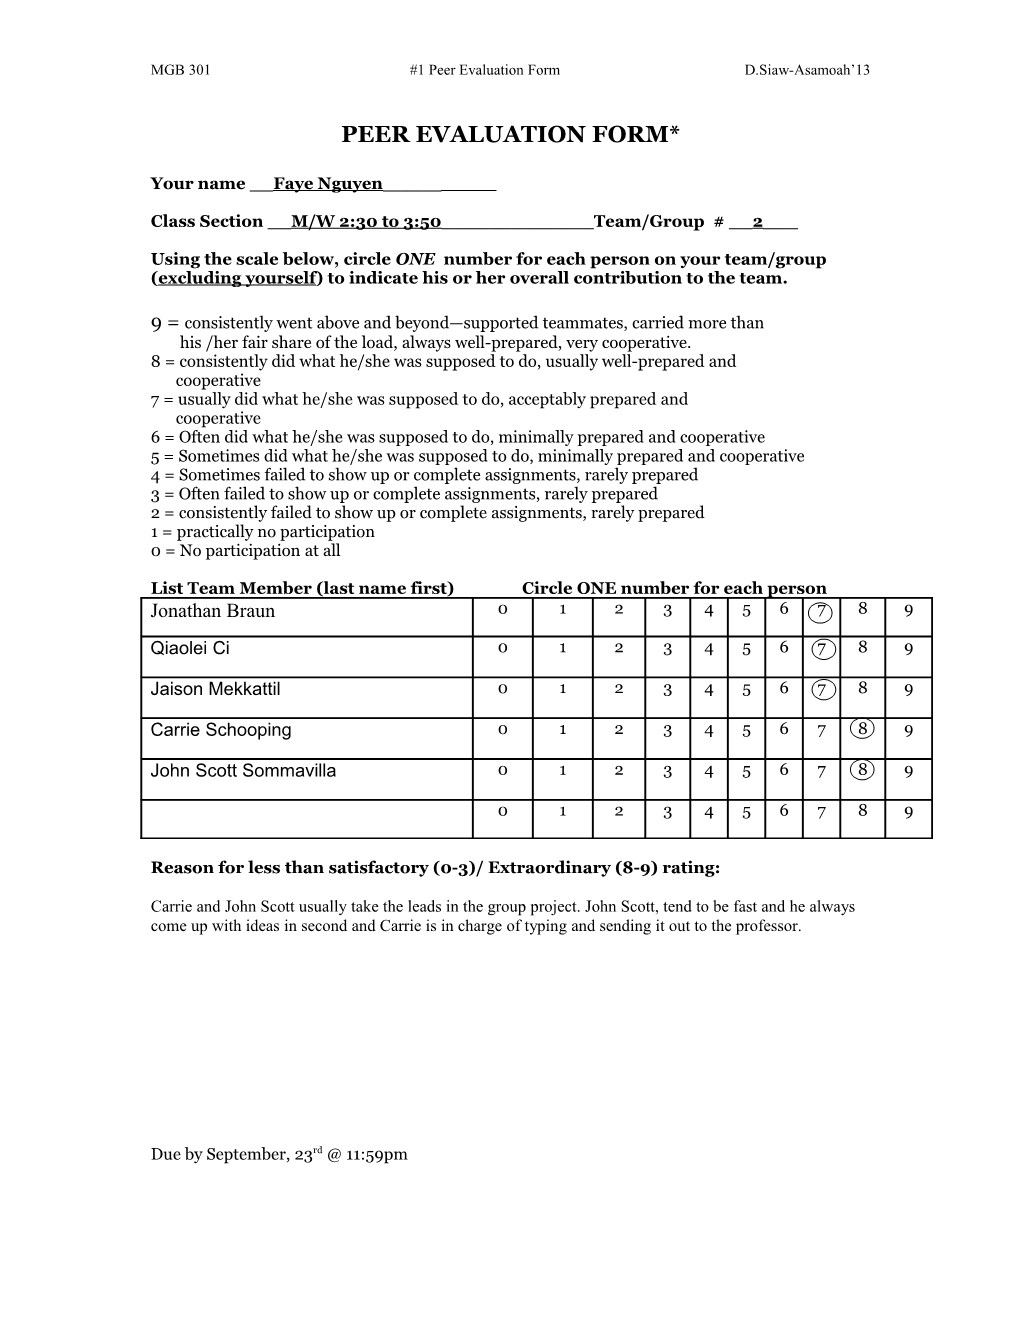 End of Term Peer Evaluation Form*